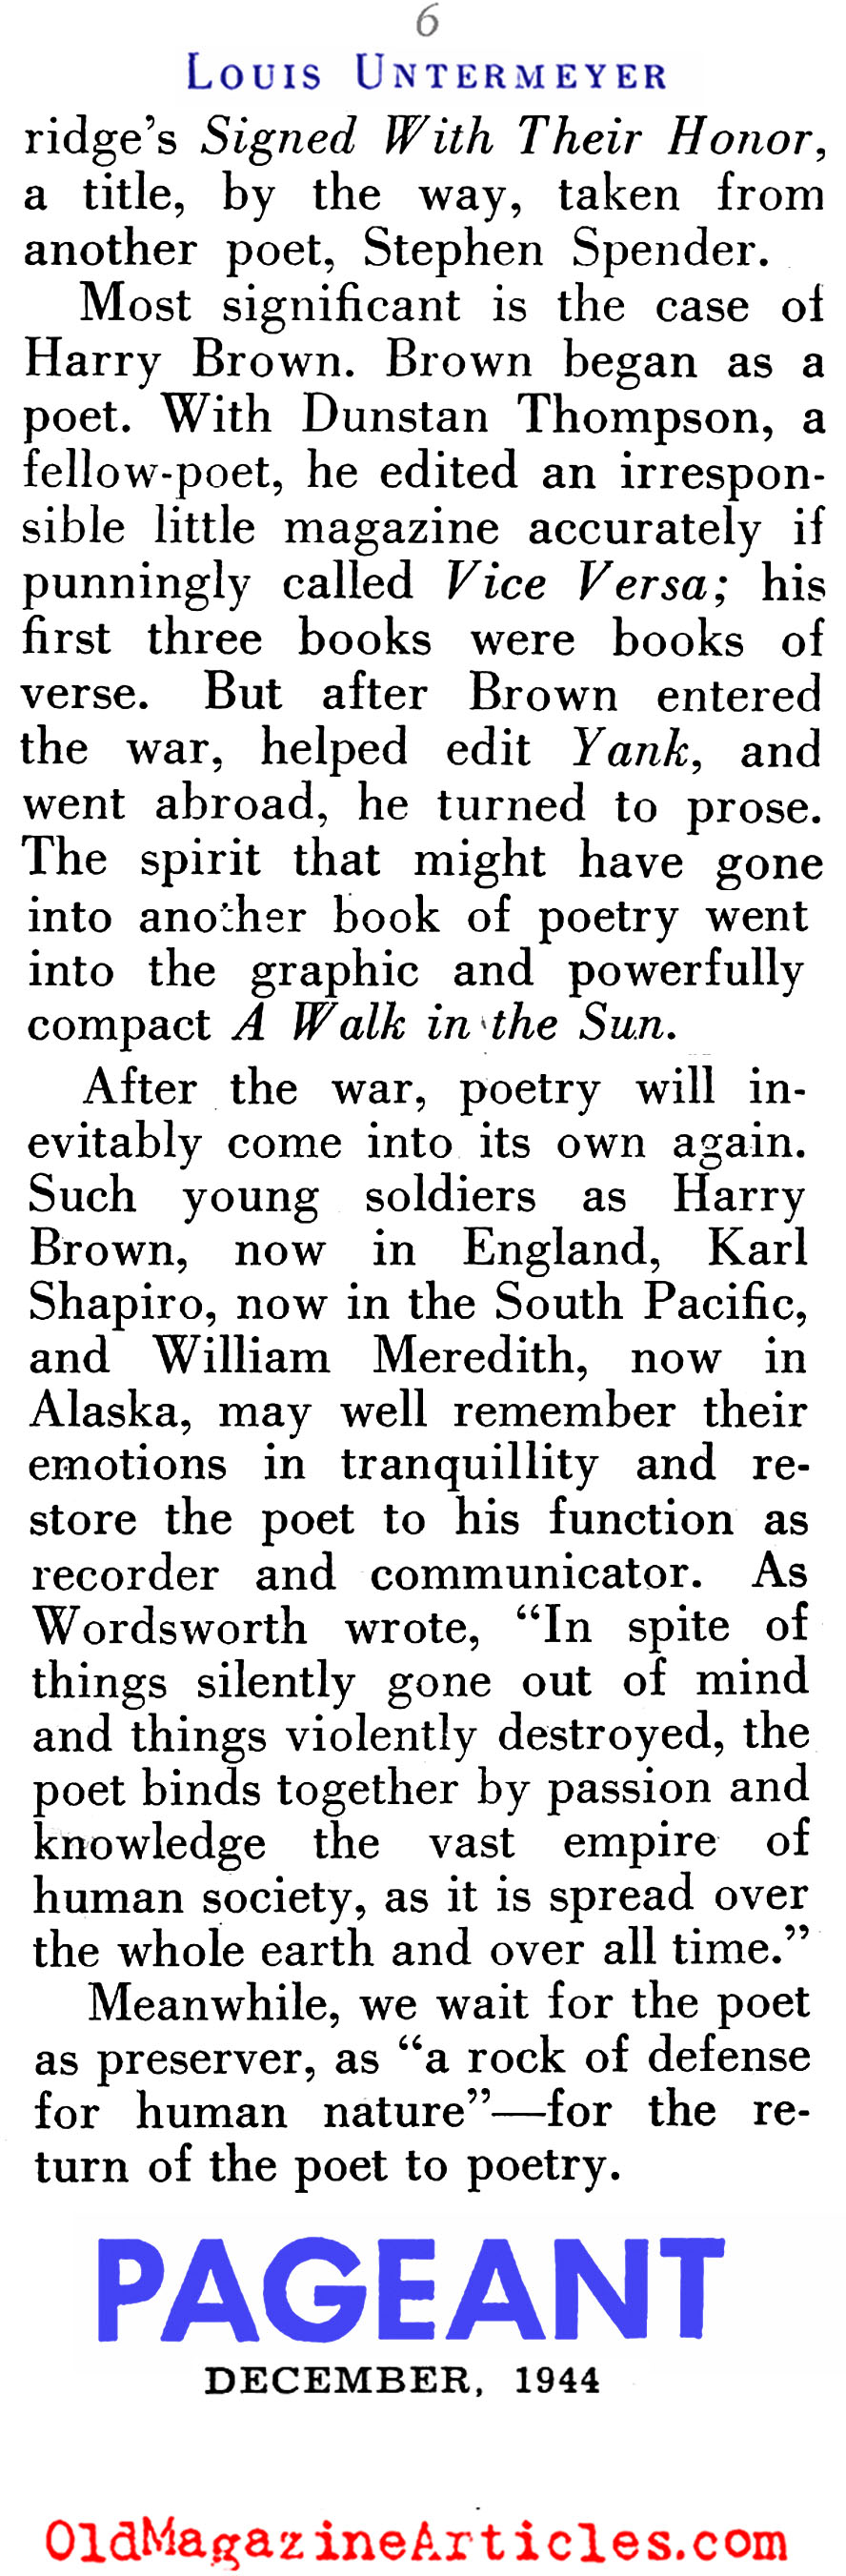 W.W. II and the Absent Poets (Pageant Magazine, 1944)